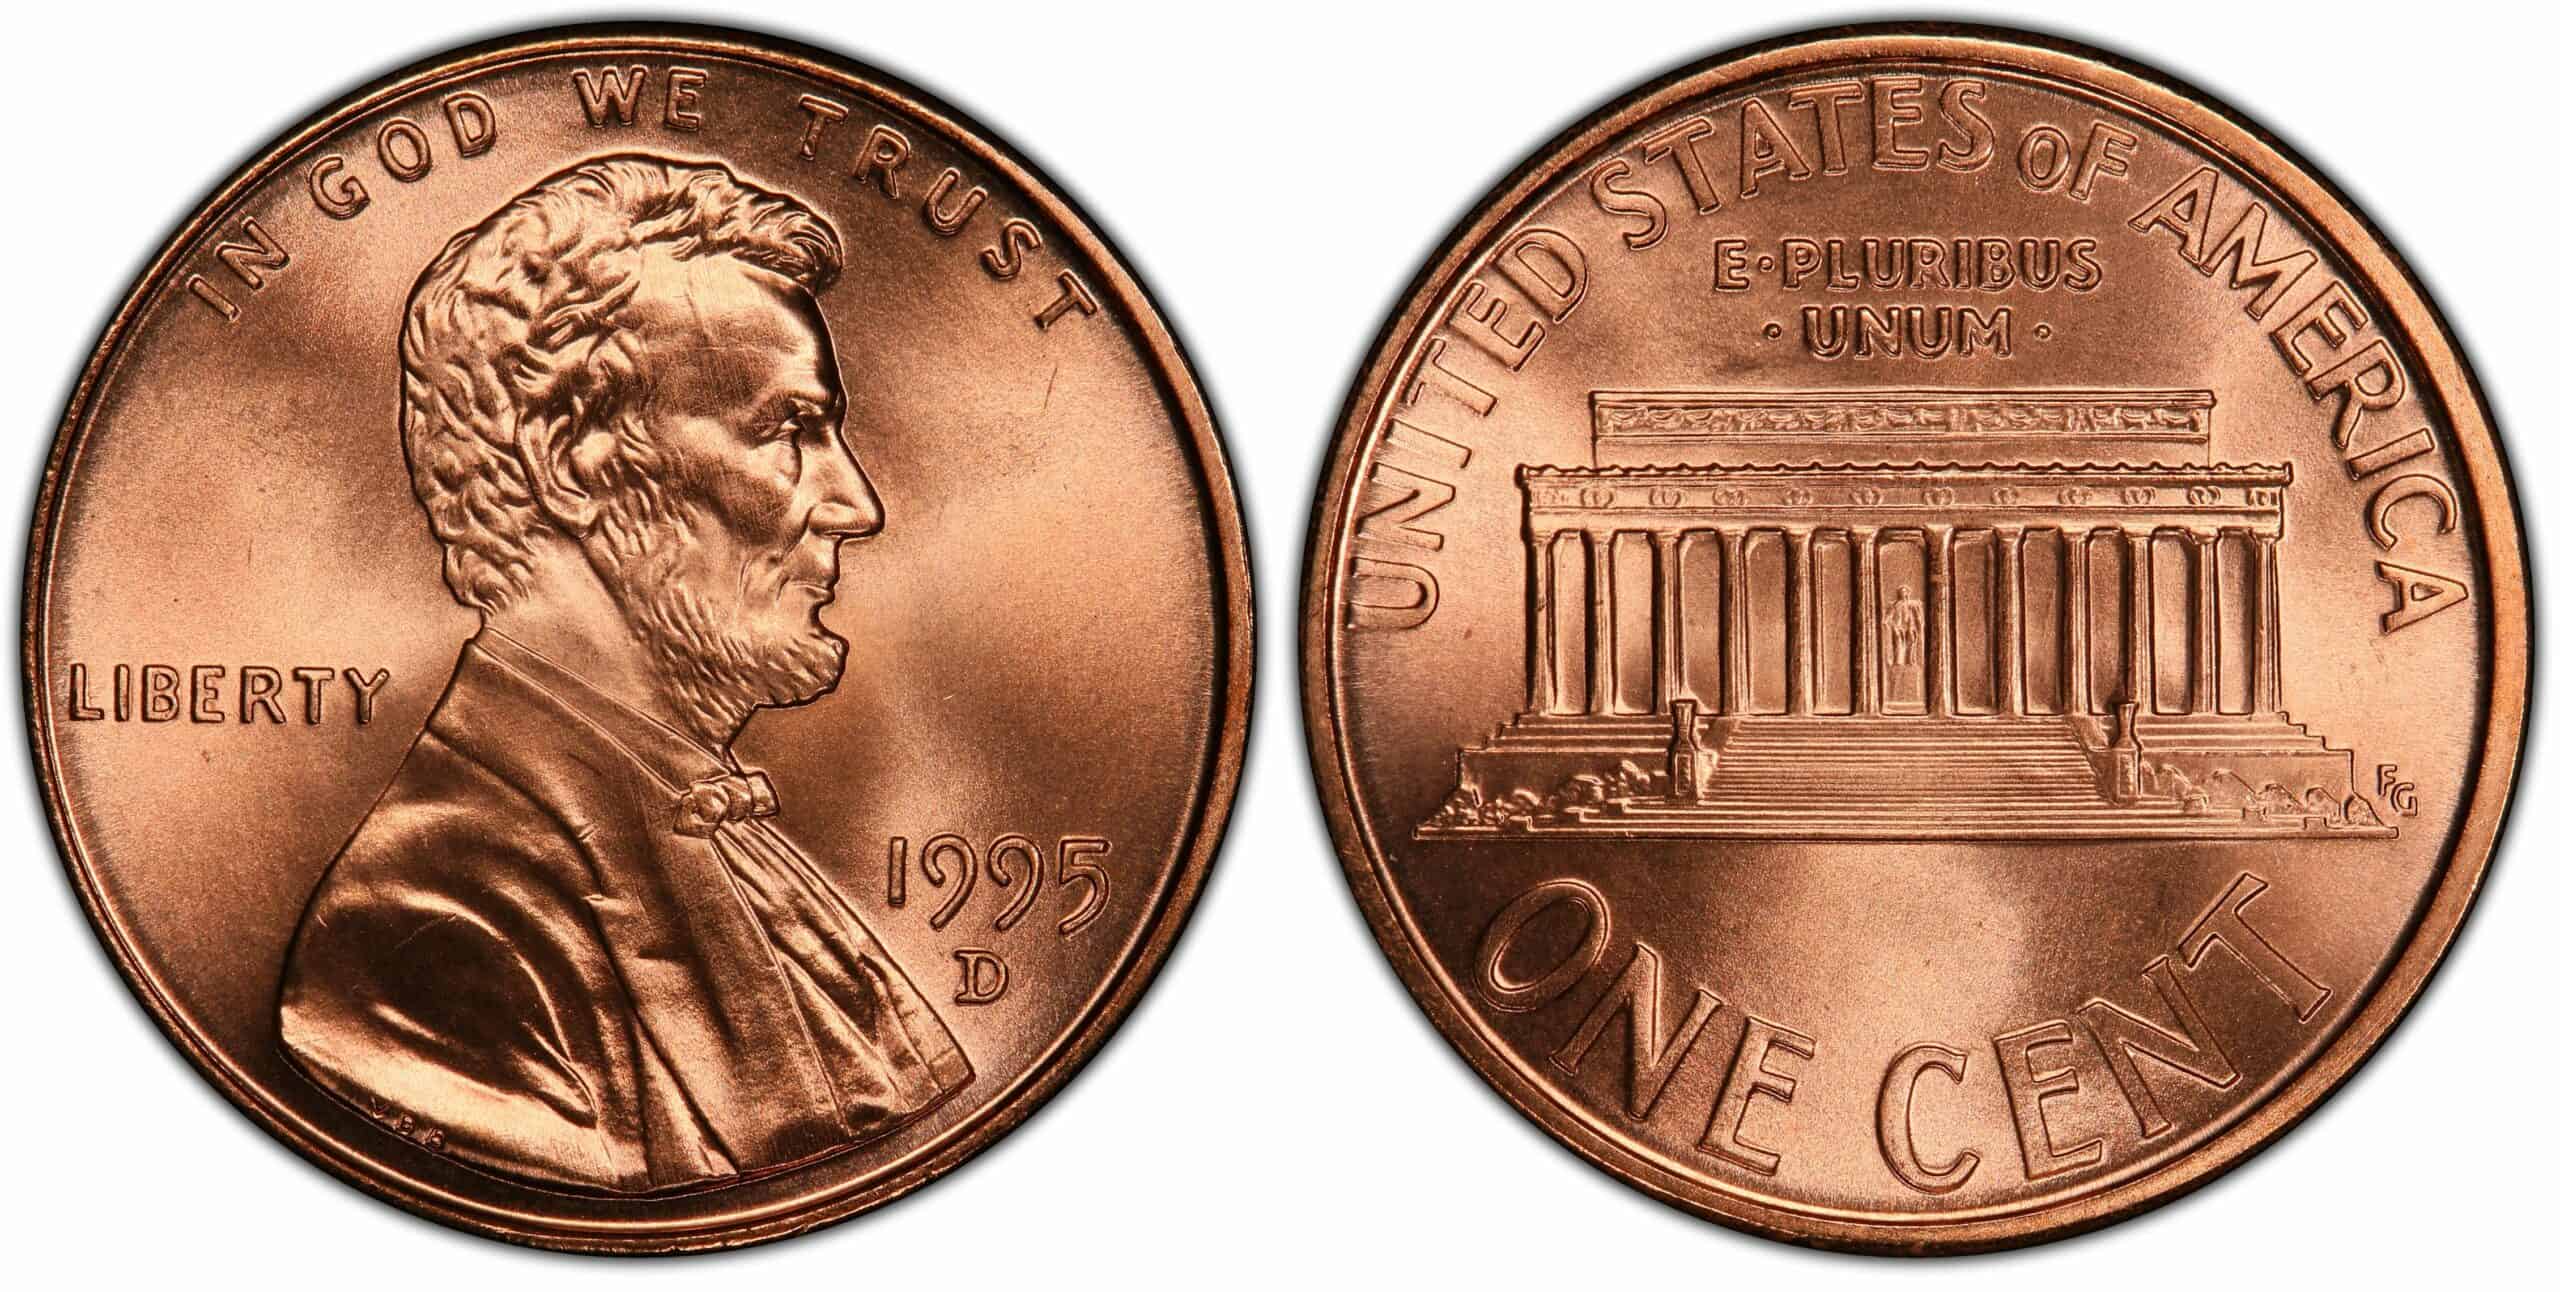 1995 D Penny Value